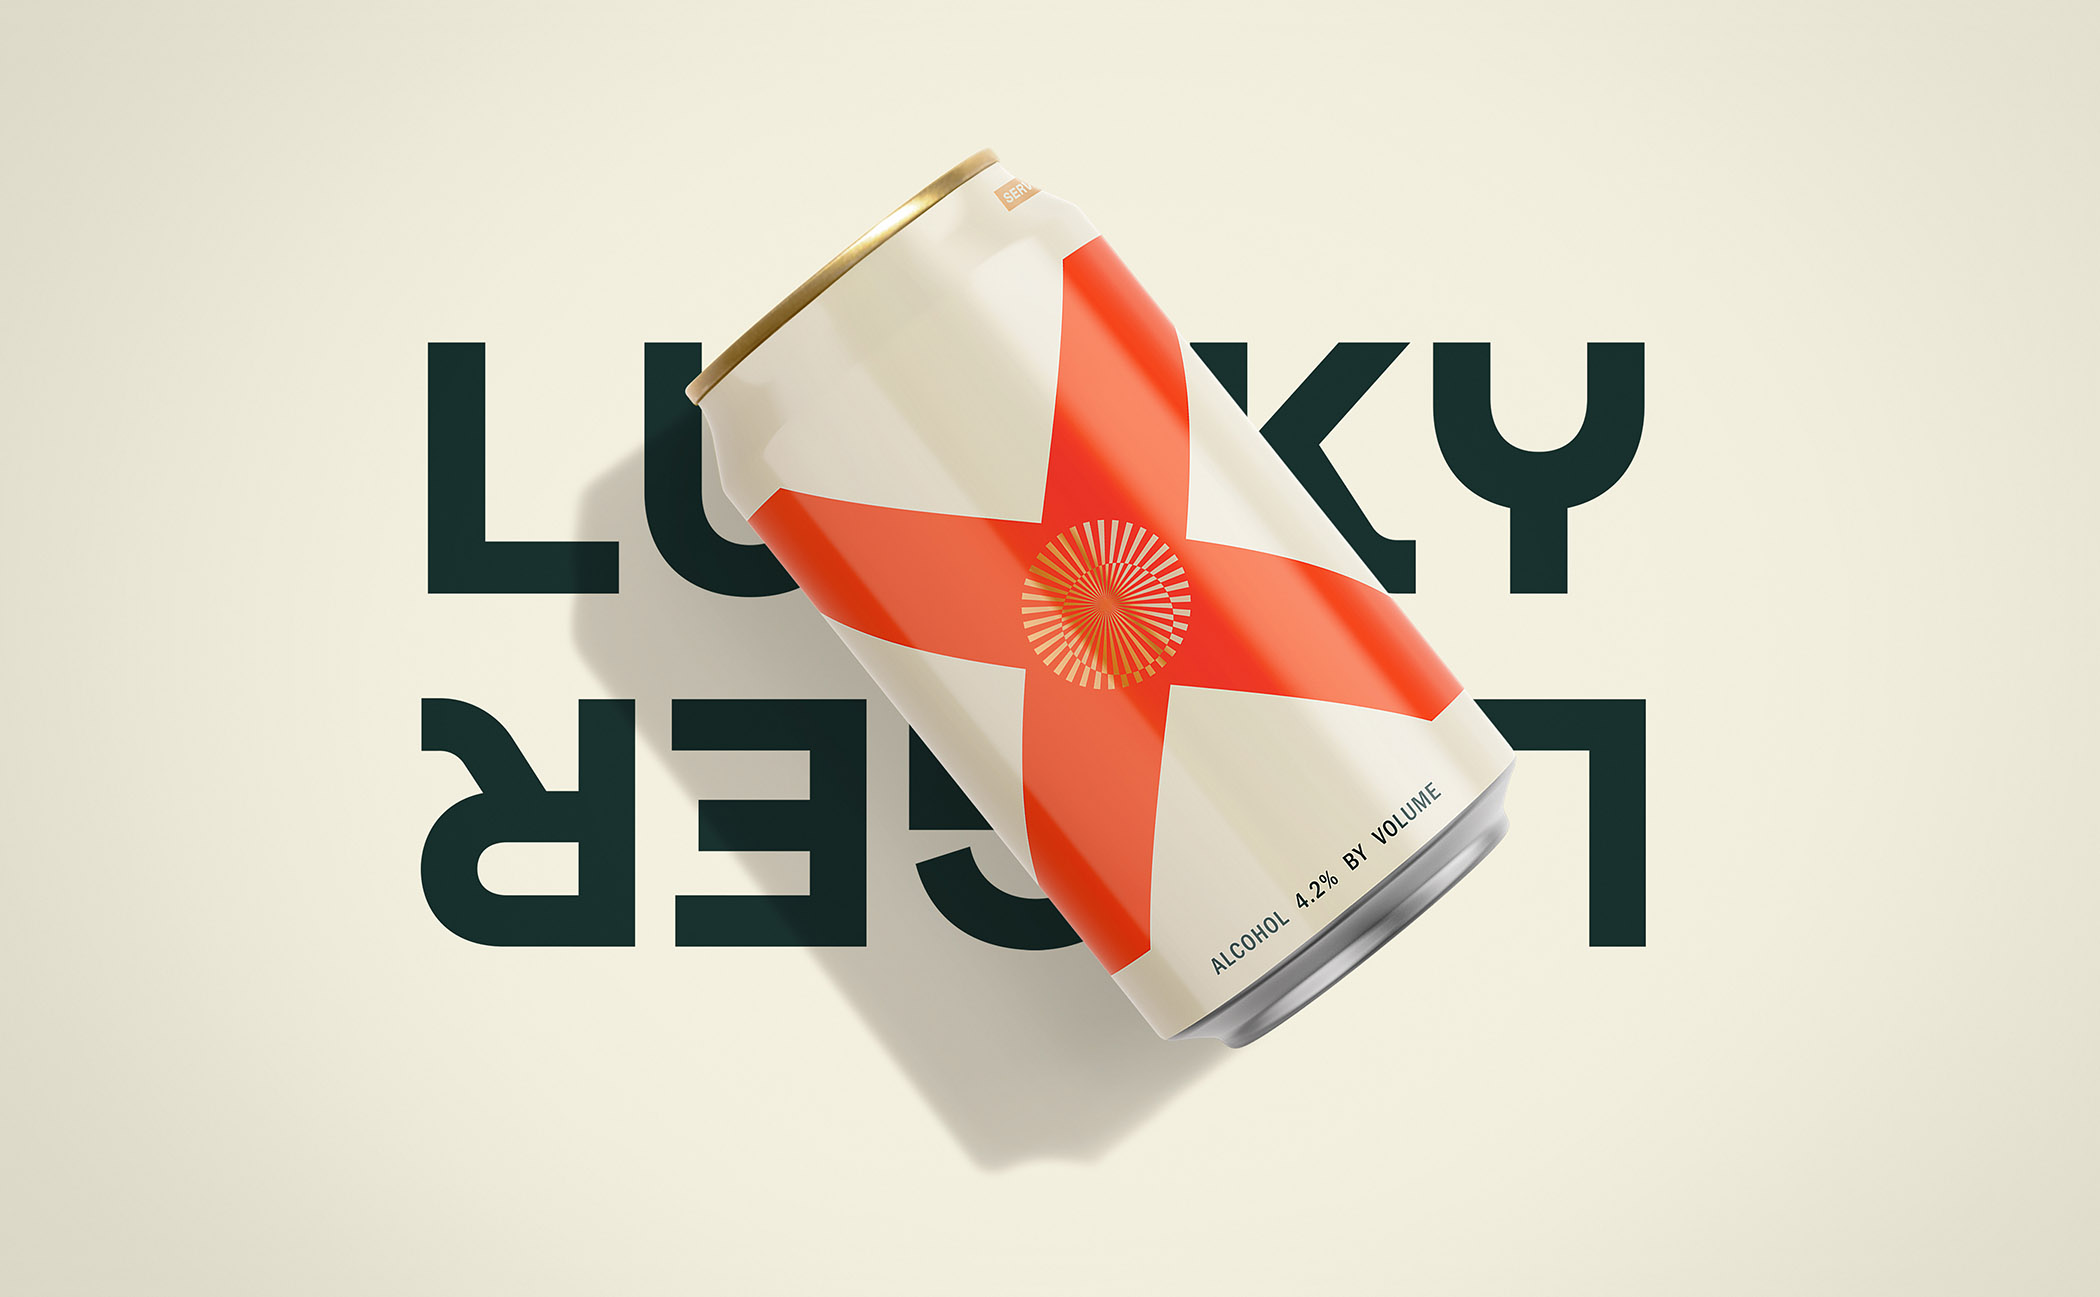 Lucky Lager Pabst beer can packaging display with logo design